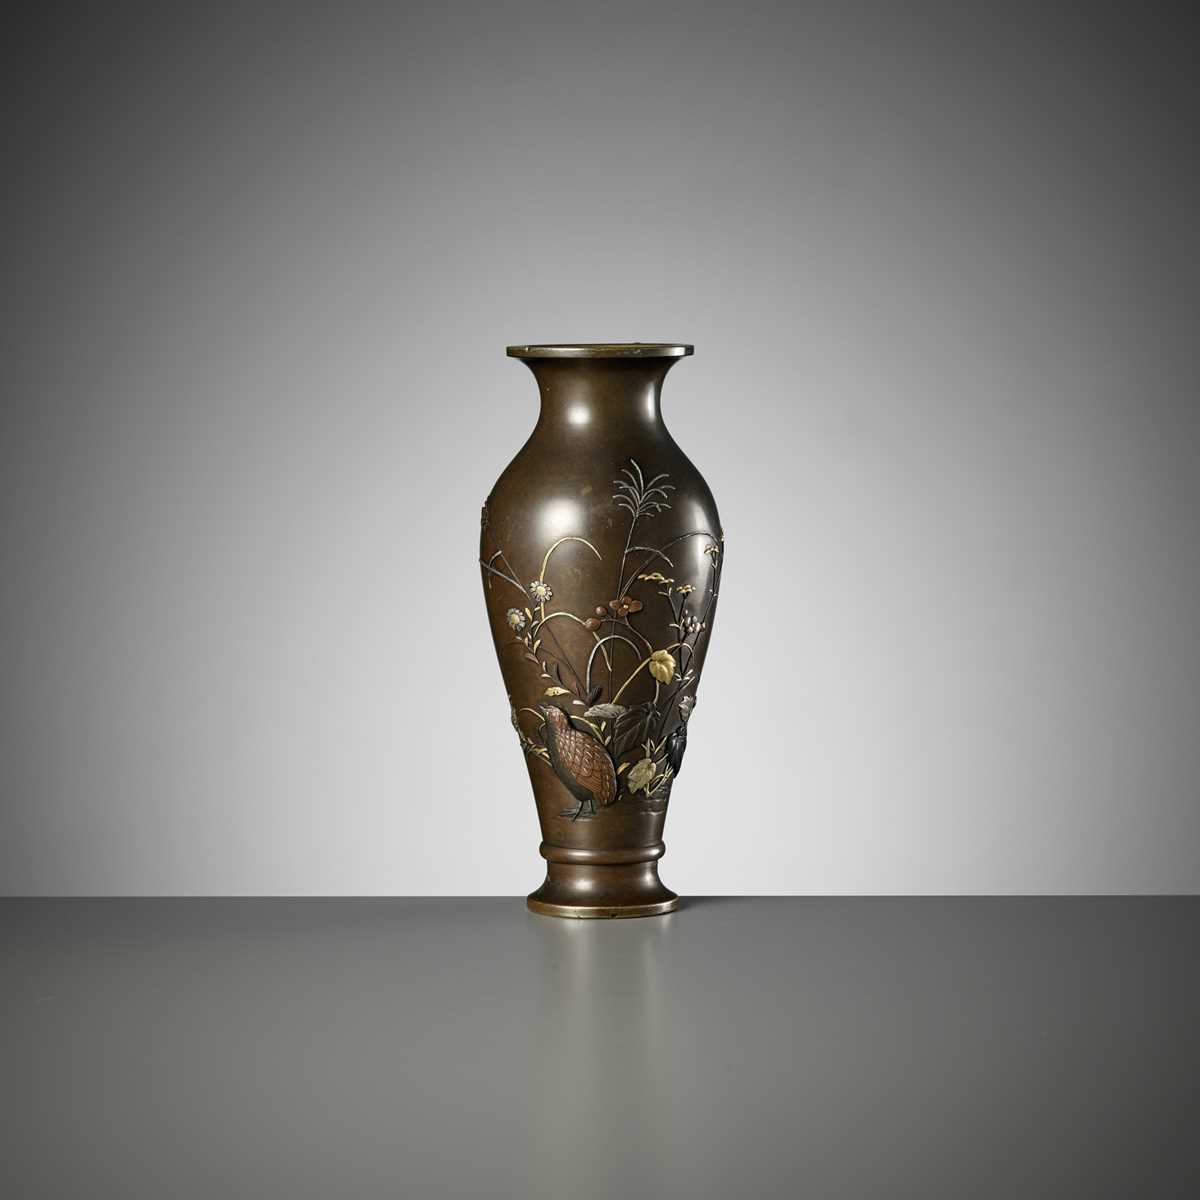 Lot 76 - A FINE INLAID BRONZE VASE WITH QUAIL AND AUTUMN GRASSES